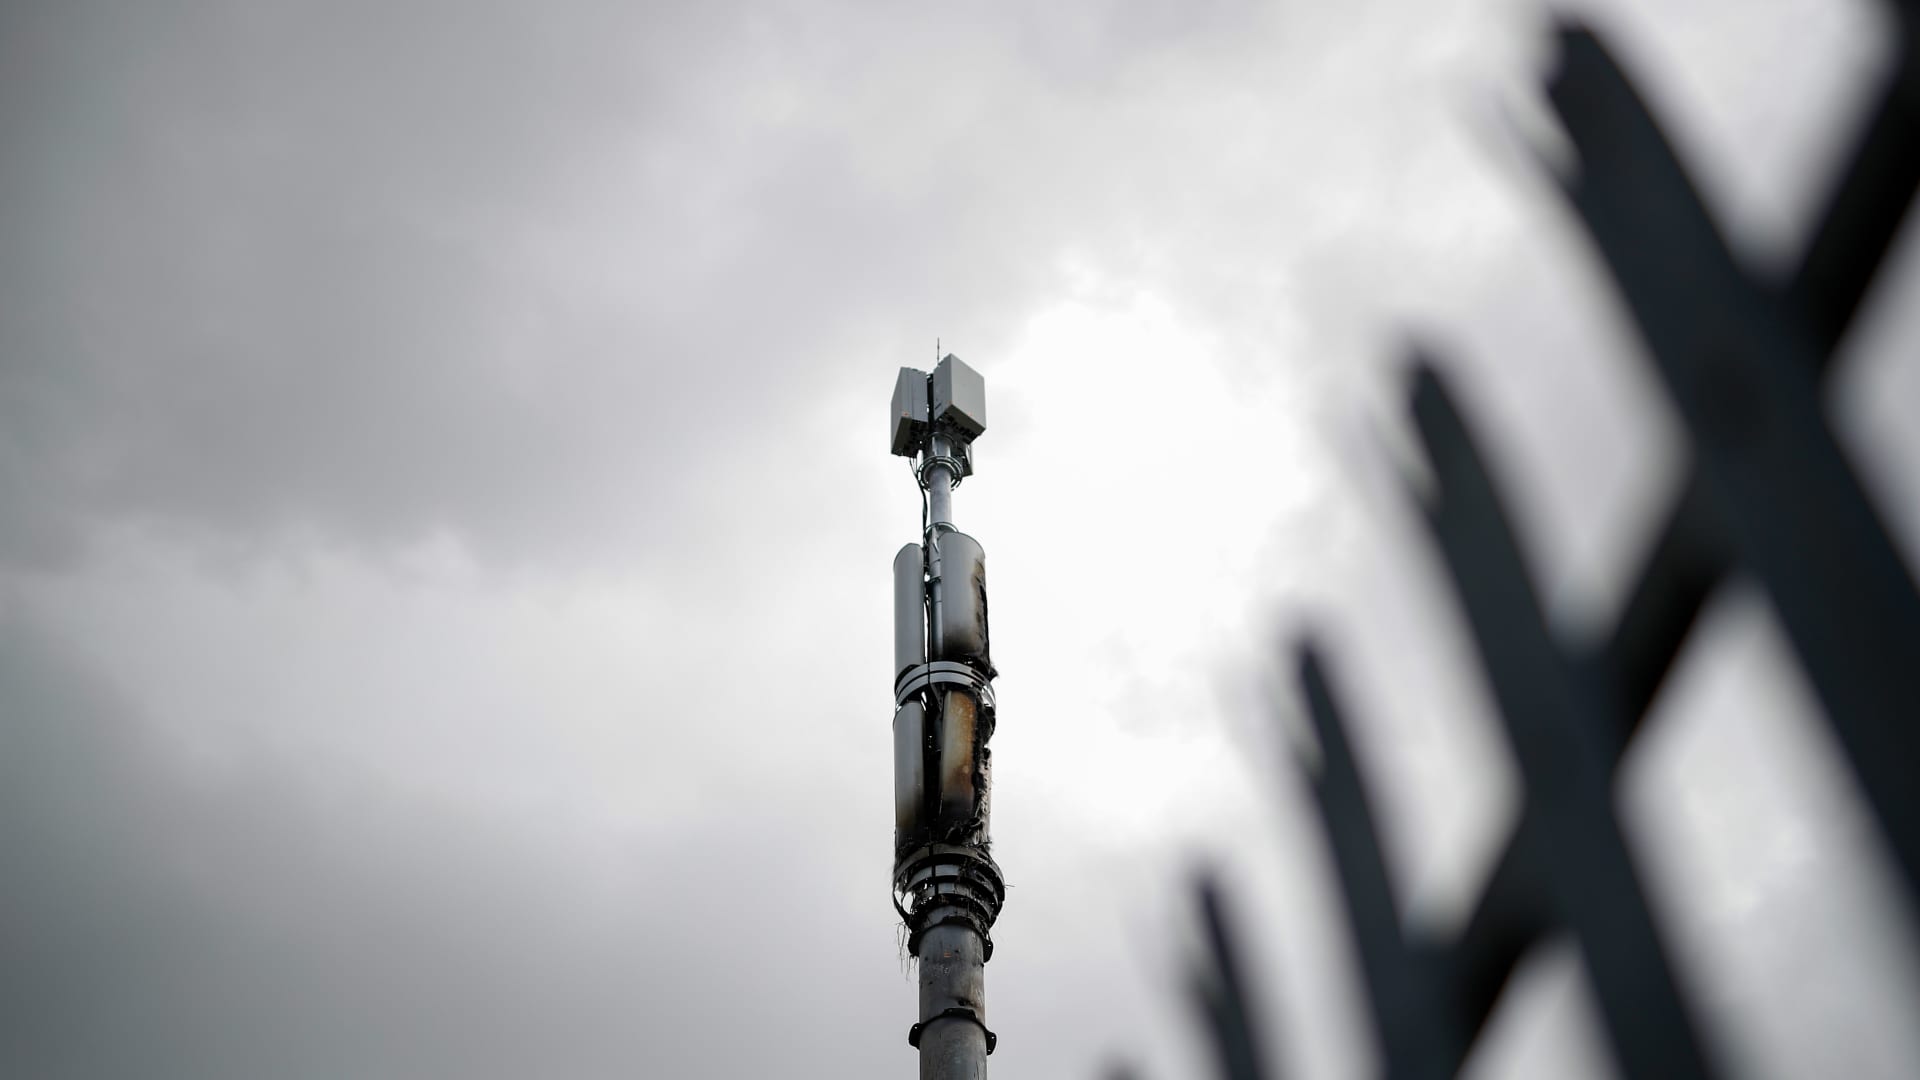 A 5G tower was damaged in a fire in the Birmingham, England in April 2020, during a trend of telecommunications equipment being set on fire because of false claims of a link between 5G and Covid-19.